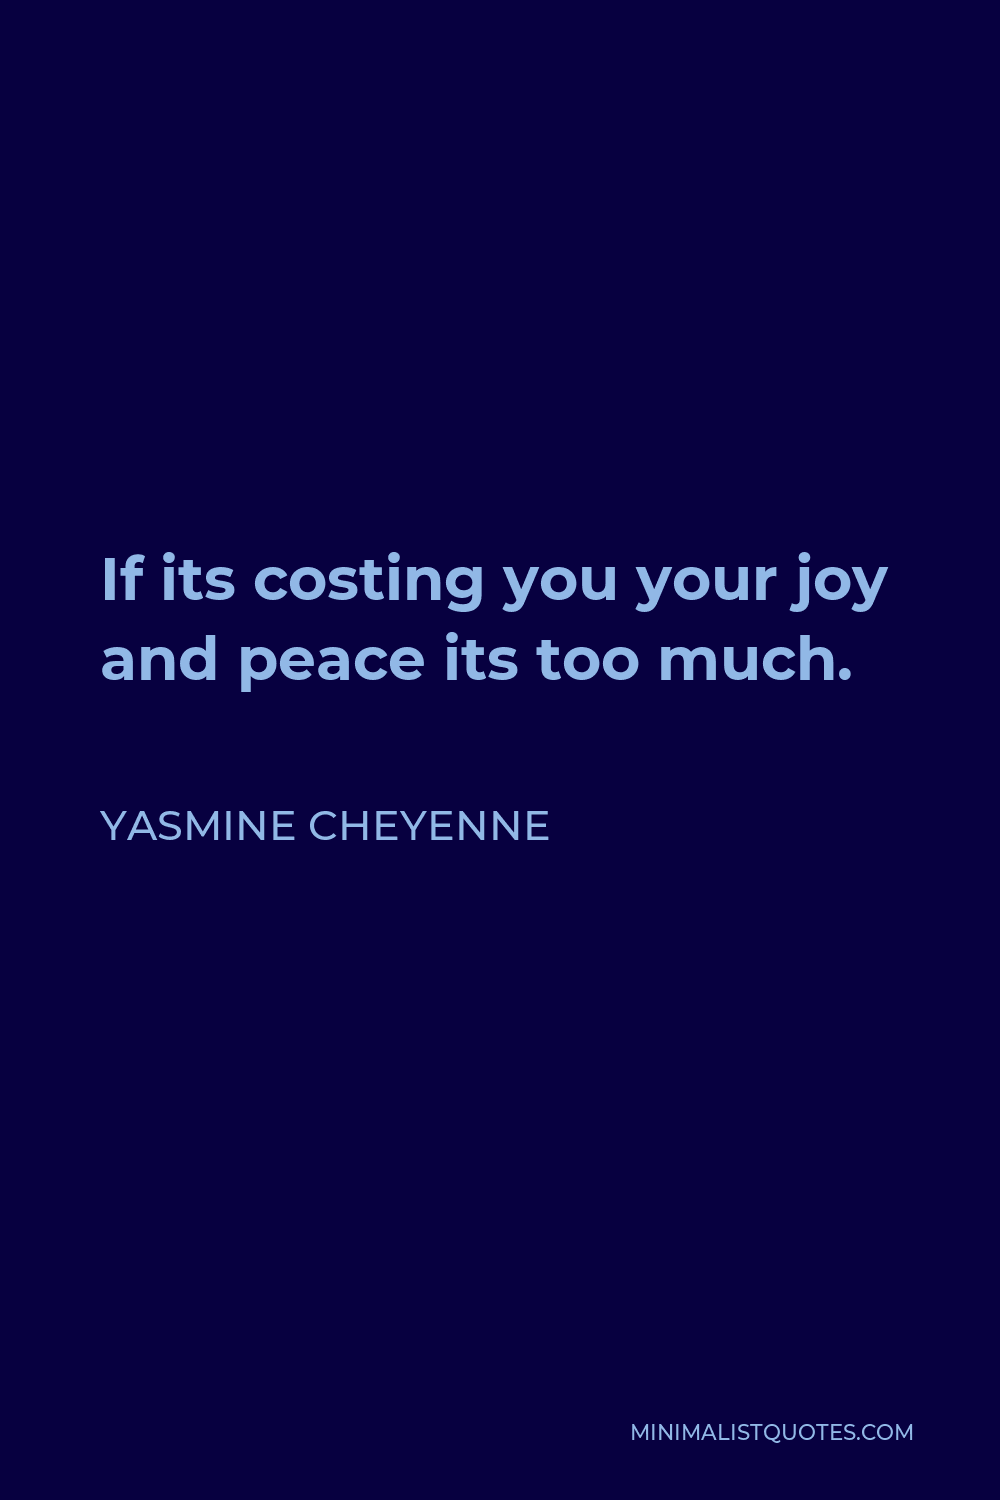 Yasmine Cheyenne Quote - If its costing you your joy and peace its too much.